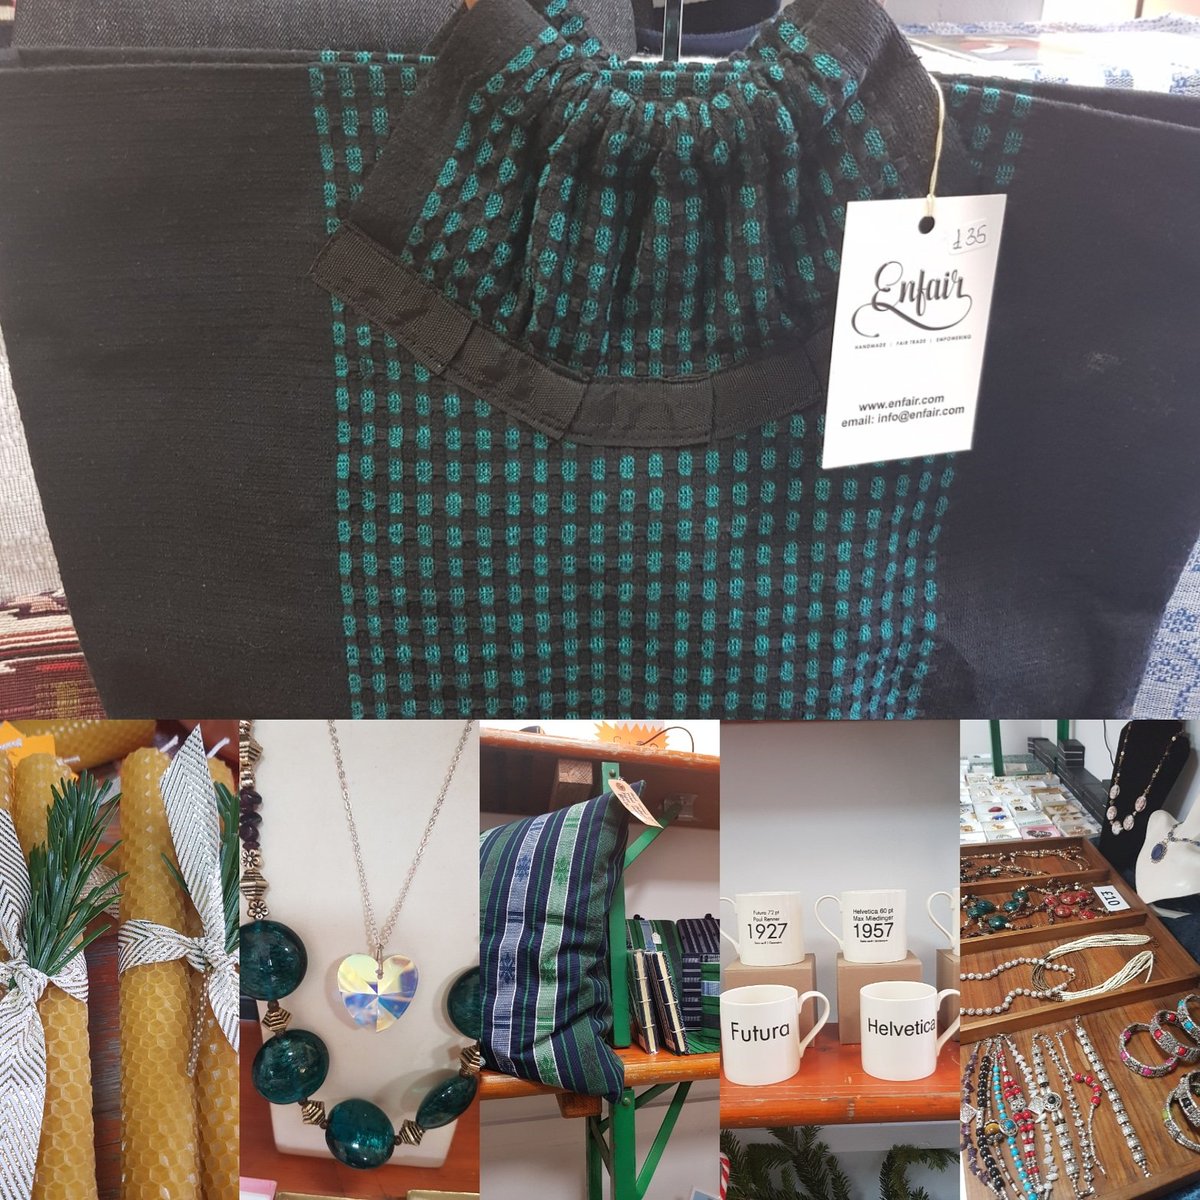 Our items are either made or sourced by local people. We're now here until January and are looking for vendors who want us to sell their wares. Can we sell your stuff? @StokeNewingtN16 @FBC_EastLondon @HackneyBusiness @hackneycoops @FSBGtrLondon #localartisans #popupshop #stokey